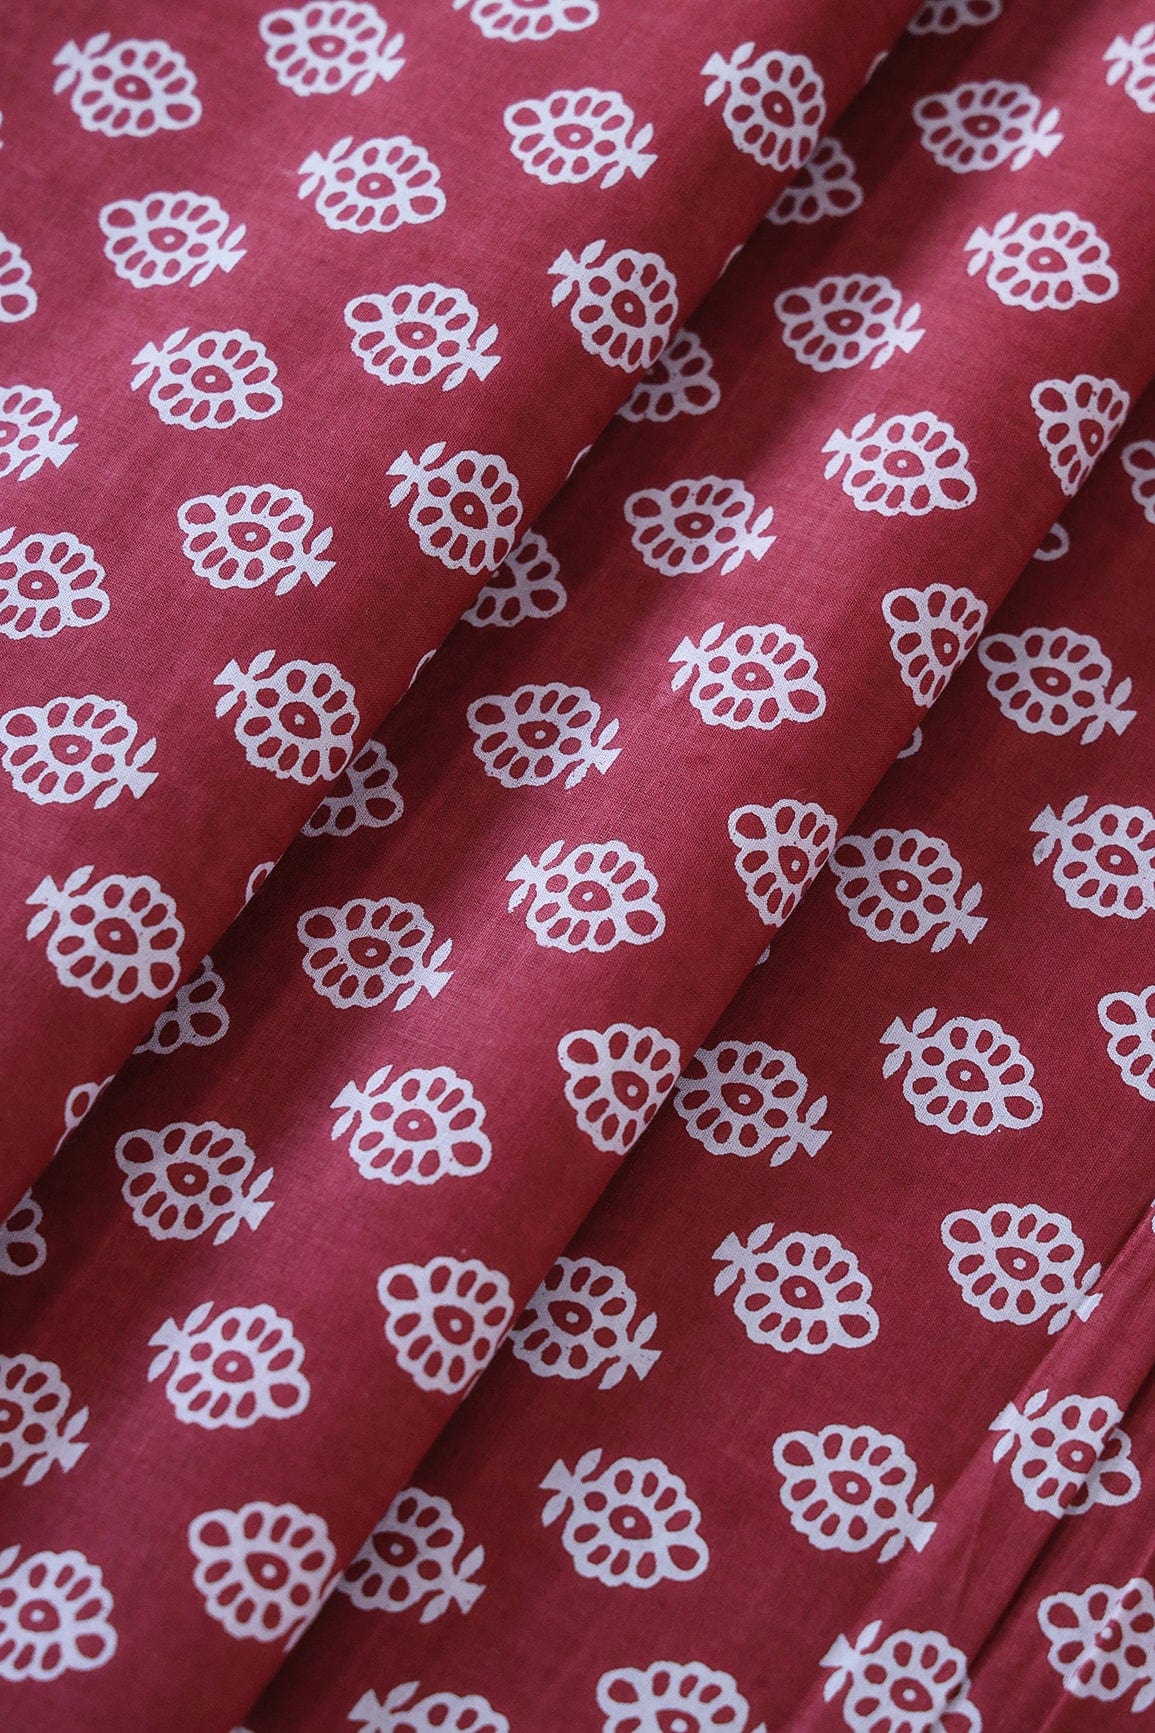 doeraa Prints White Small Floral Booti Pattern Print On Maroon Pure Cotton Fabric